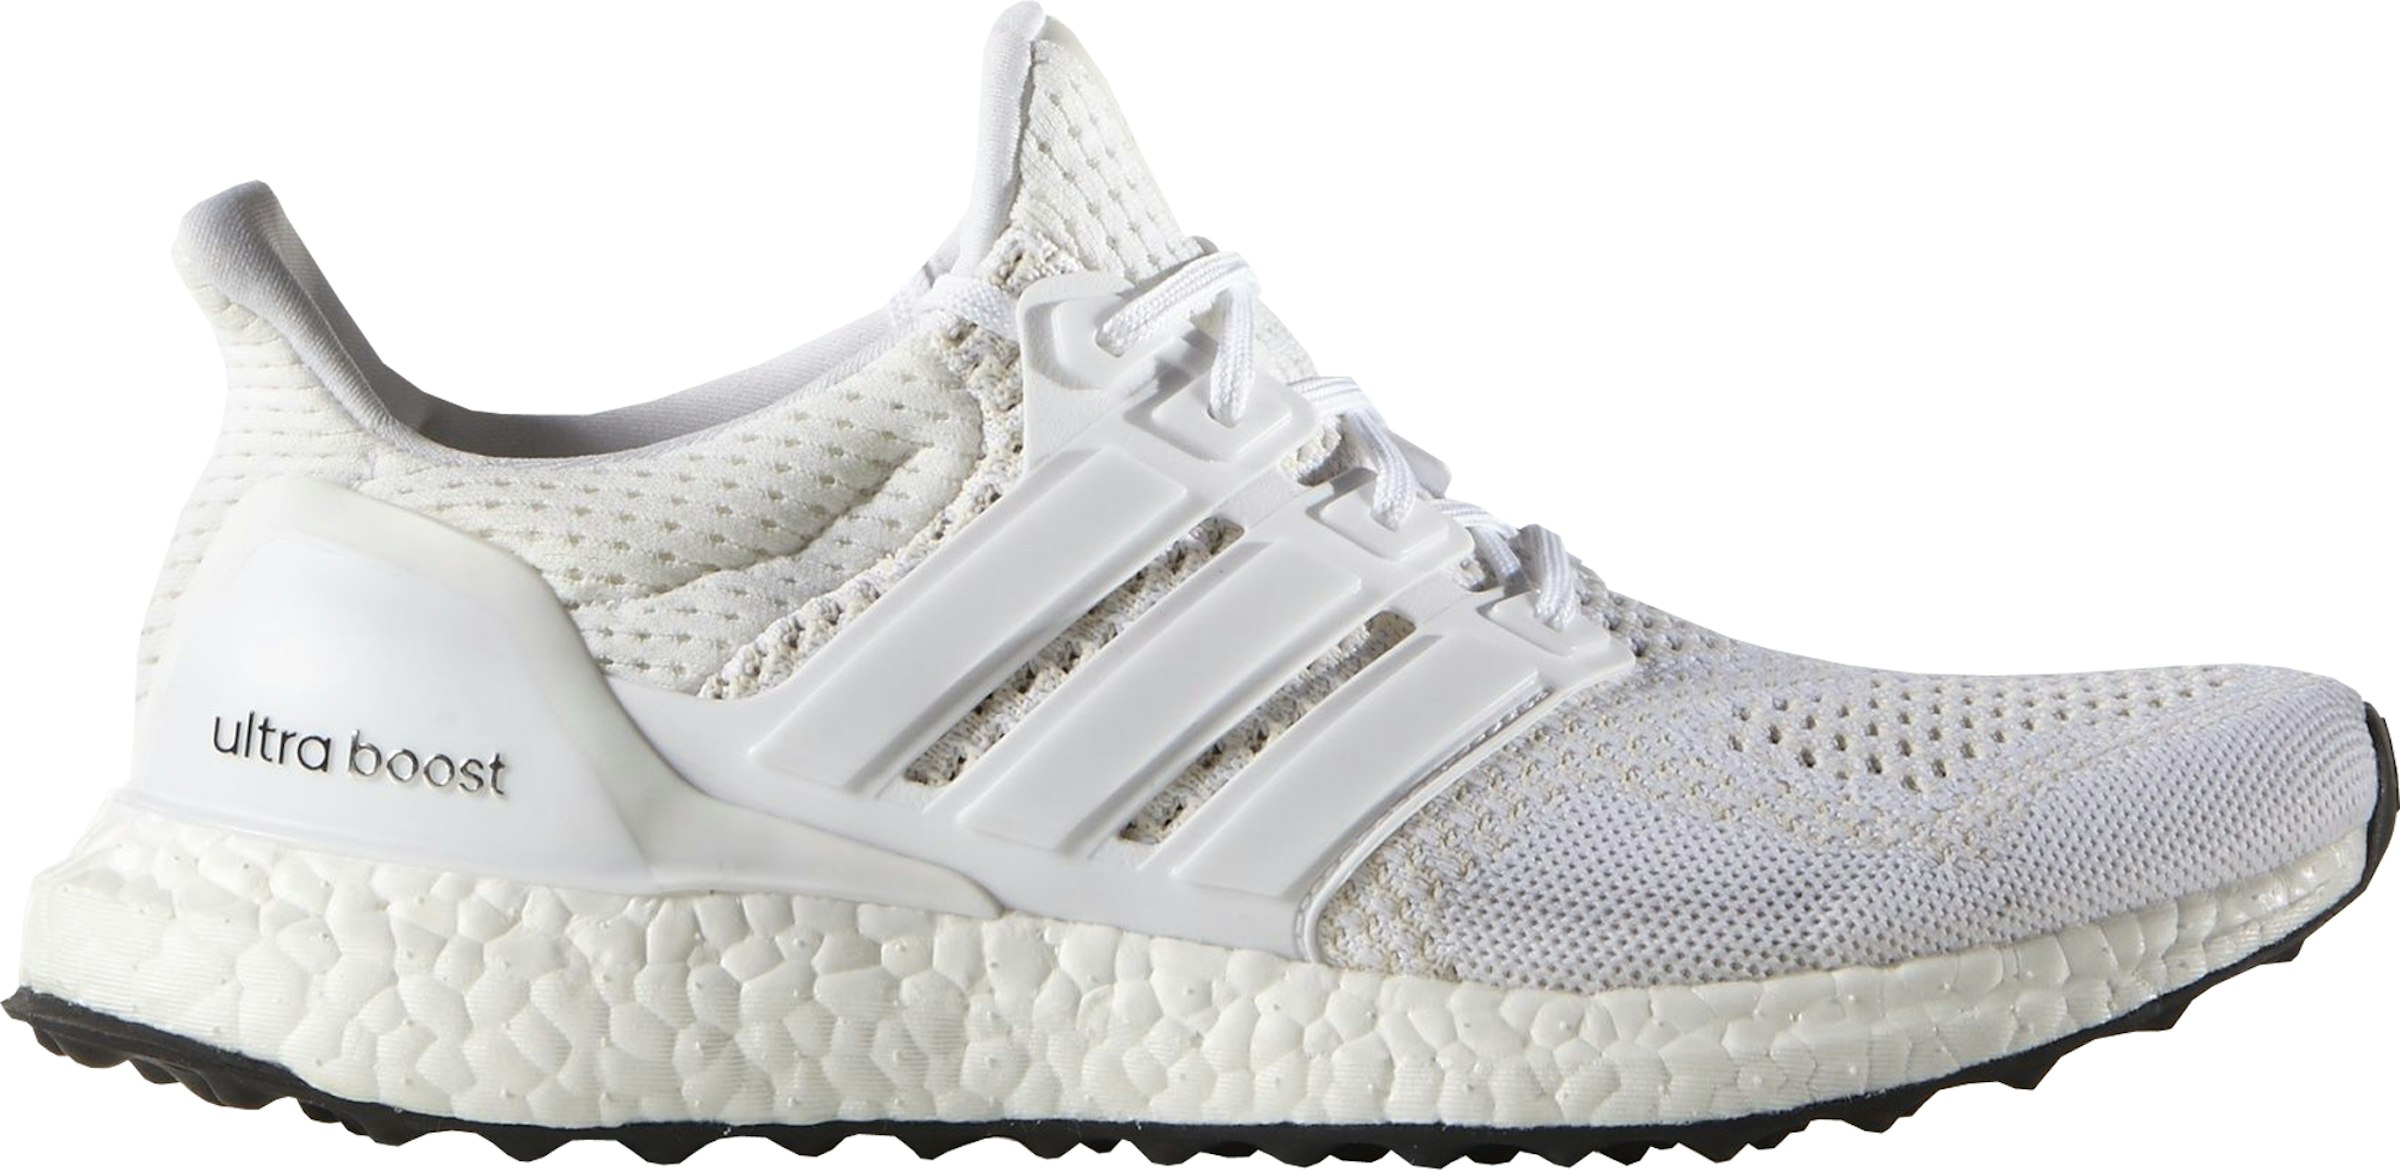 insondable agujero Independiente adidas Ultra Boost 1.0 Triple White (Women's) - S77513 - US